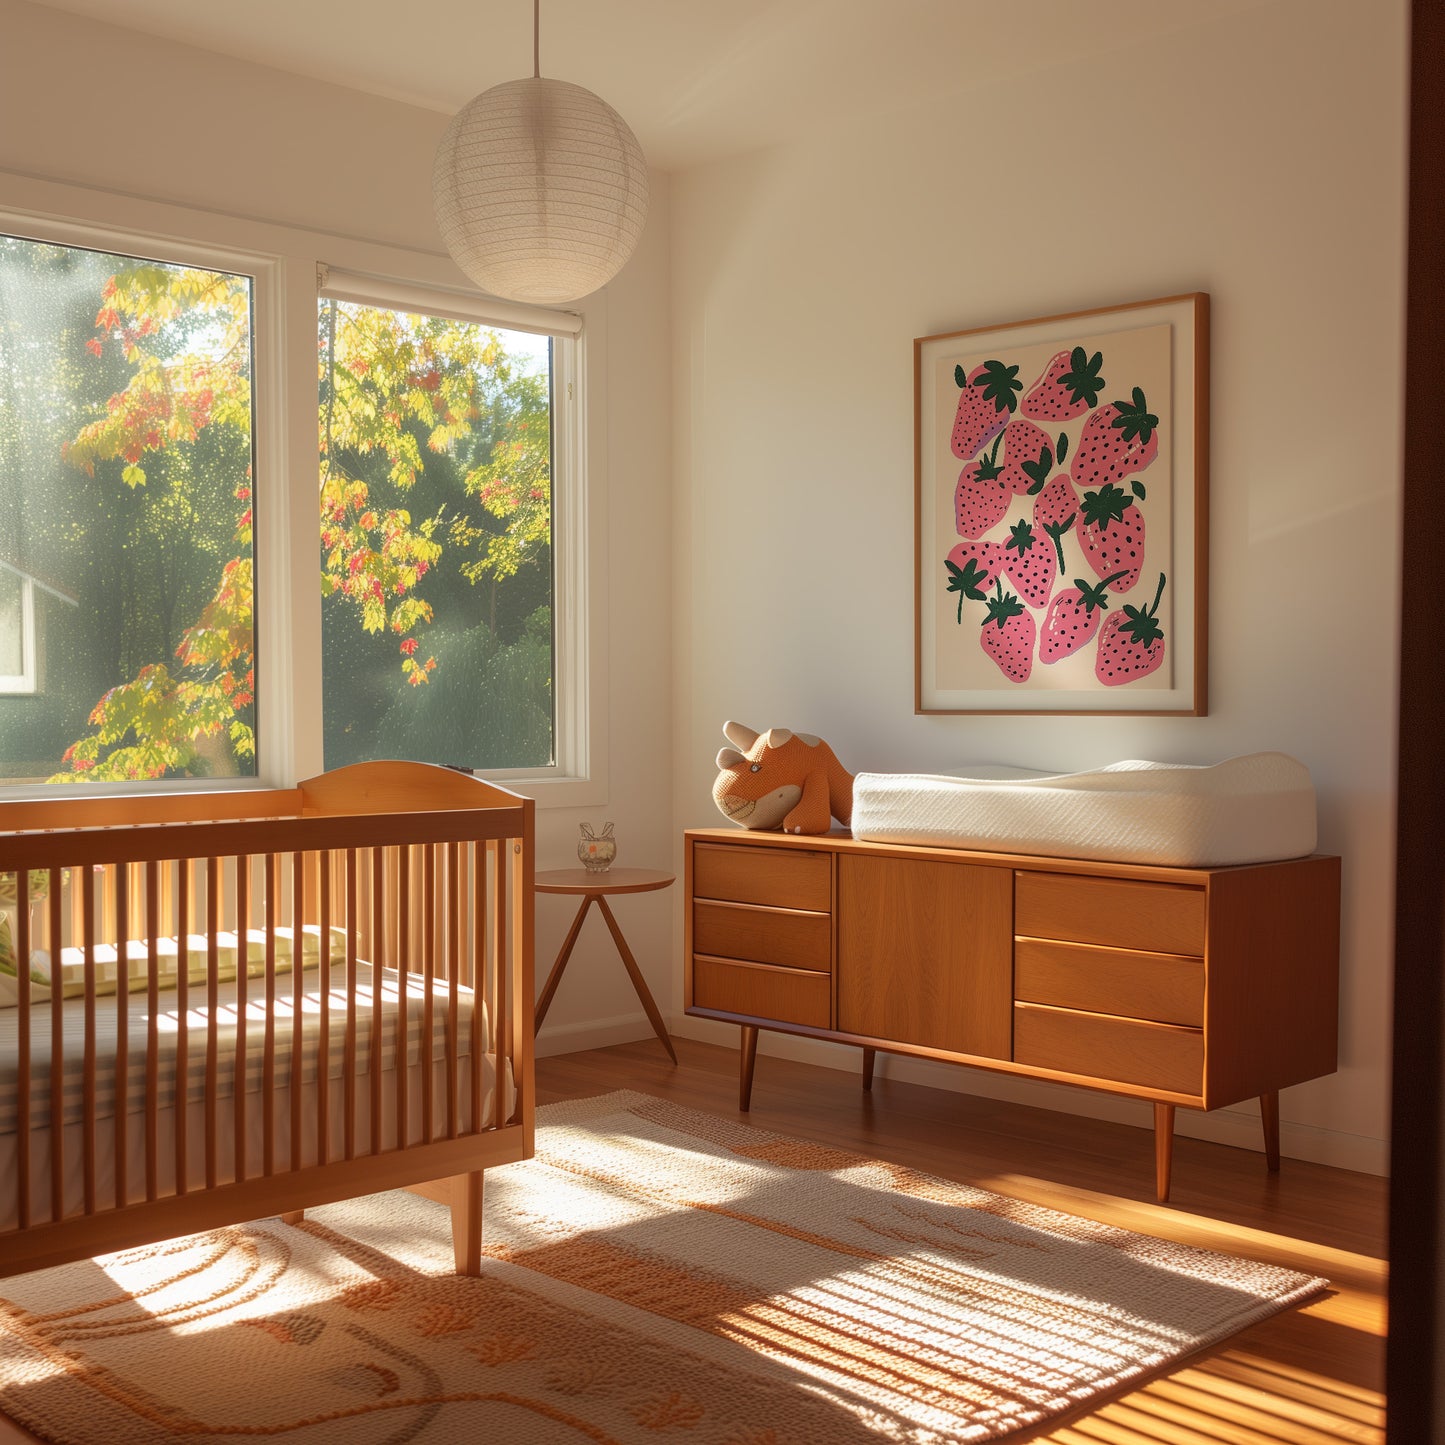 A cozy nursery room with a crib, dresser, and a colorful strawberry-themed picture on the wall.